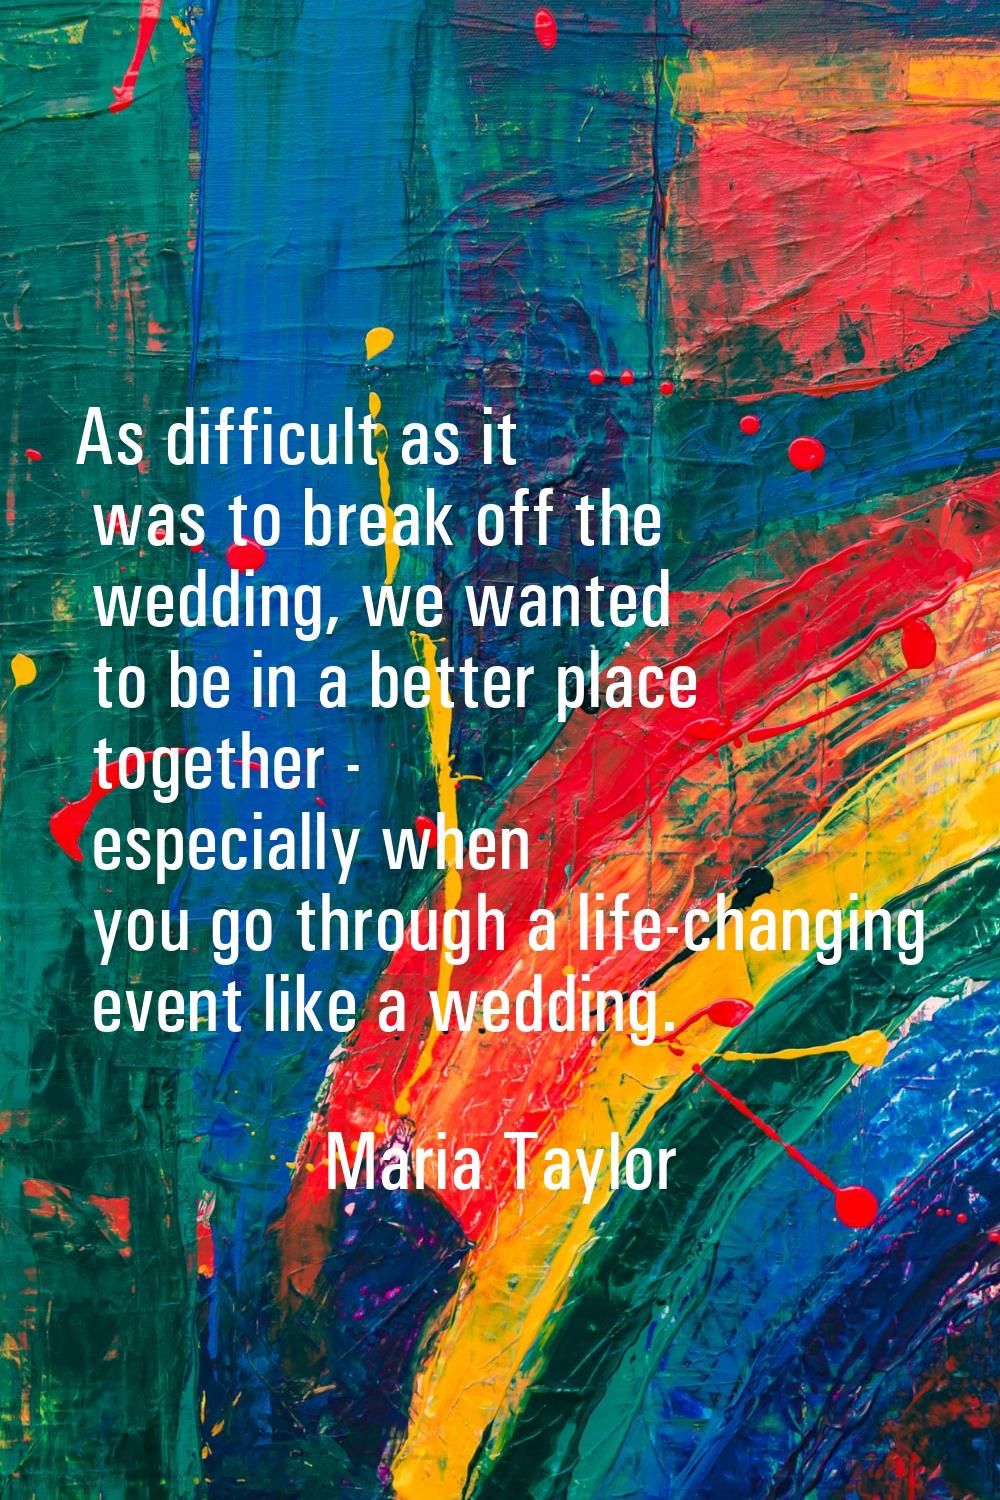 As difficult as it was to break off the wedding, we wanted to be in a better place together - espec